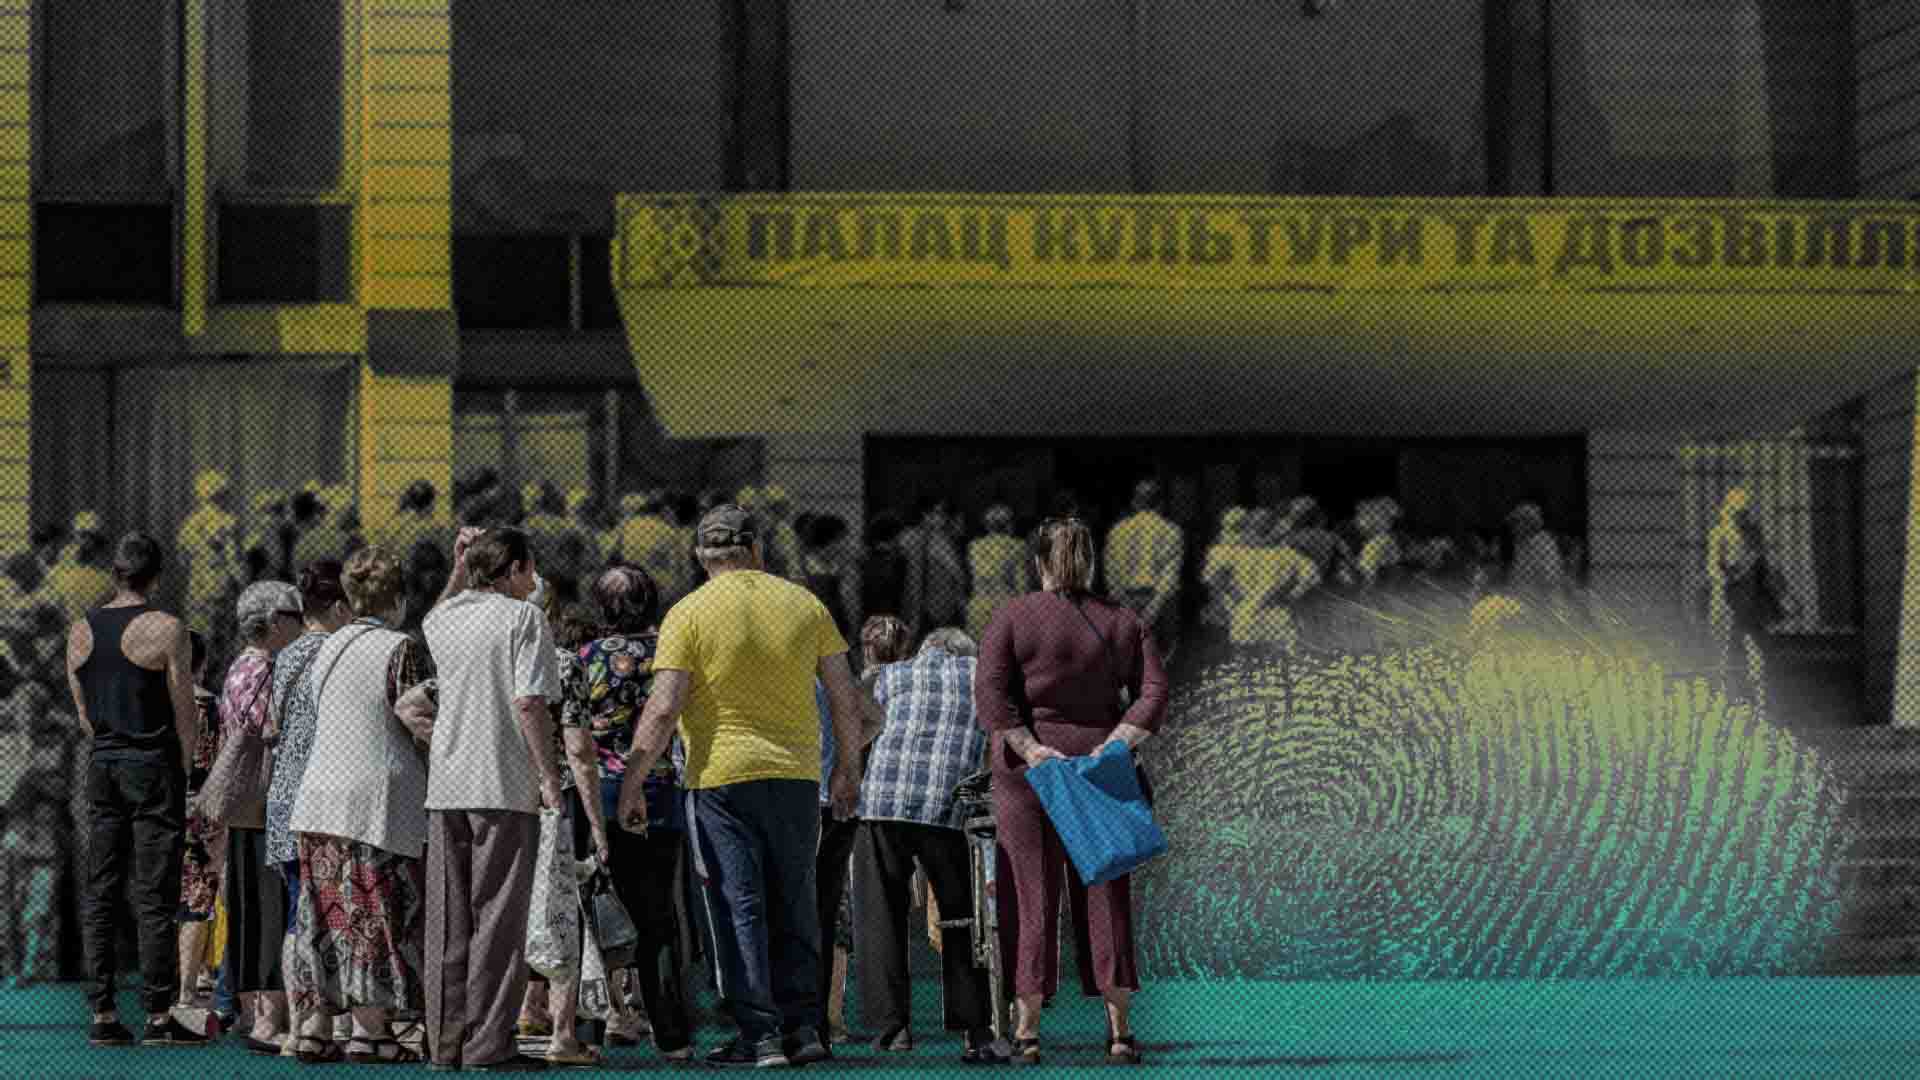 This is a graphically altered illustration, pictured are people wait in the entrance of the Culture Palace of Kostiantynivka to receive humanitarian aid. The supply of some goods was reduced drastically because the hard combats in the Donbas. The image is layered over a yellow and green gradient with an image of a fingerprint on top.